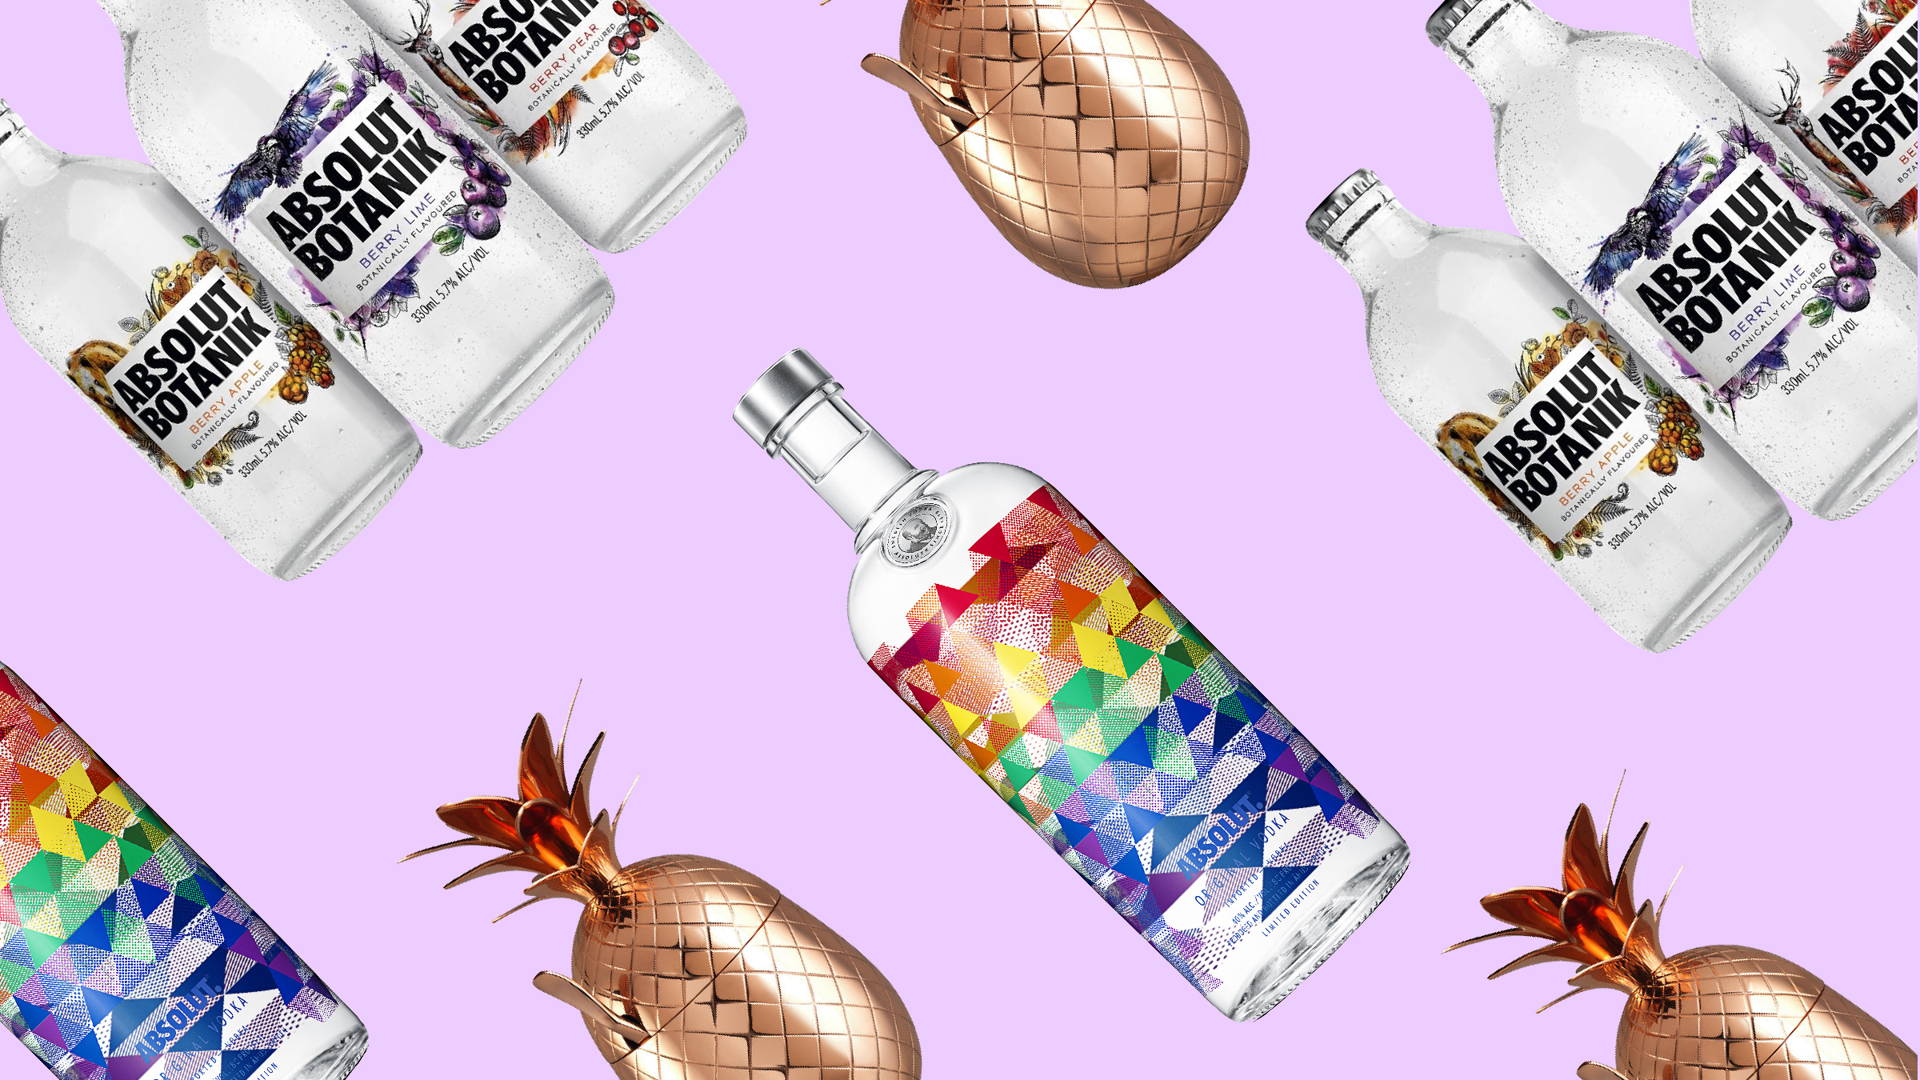 Featured image for 17 Absolut Product Designs For National Vodka Day